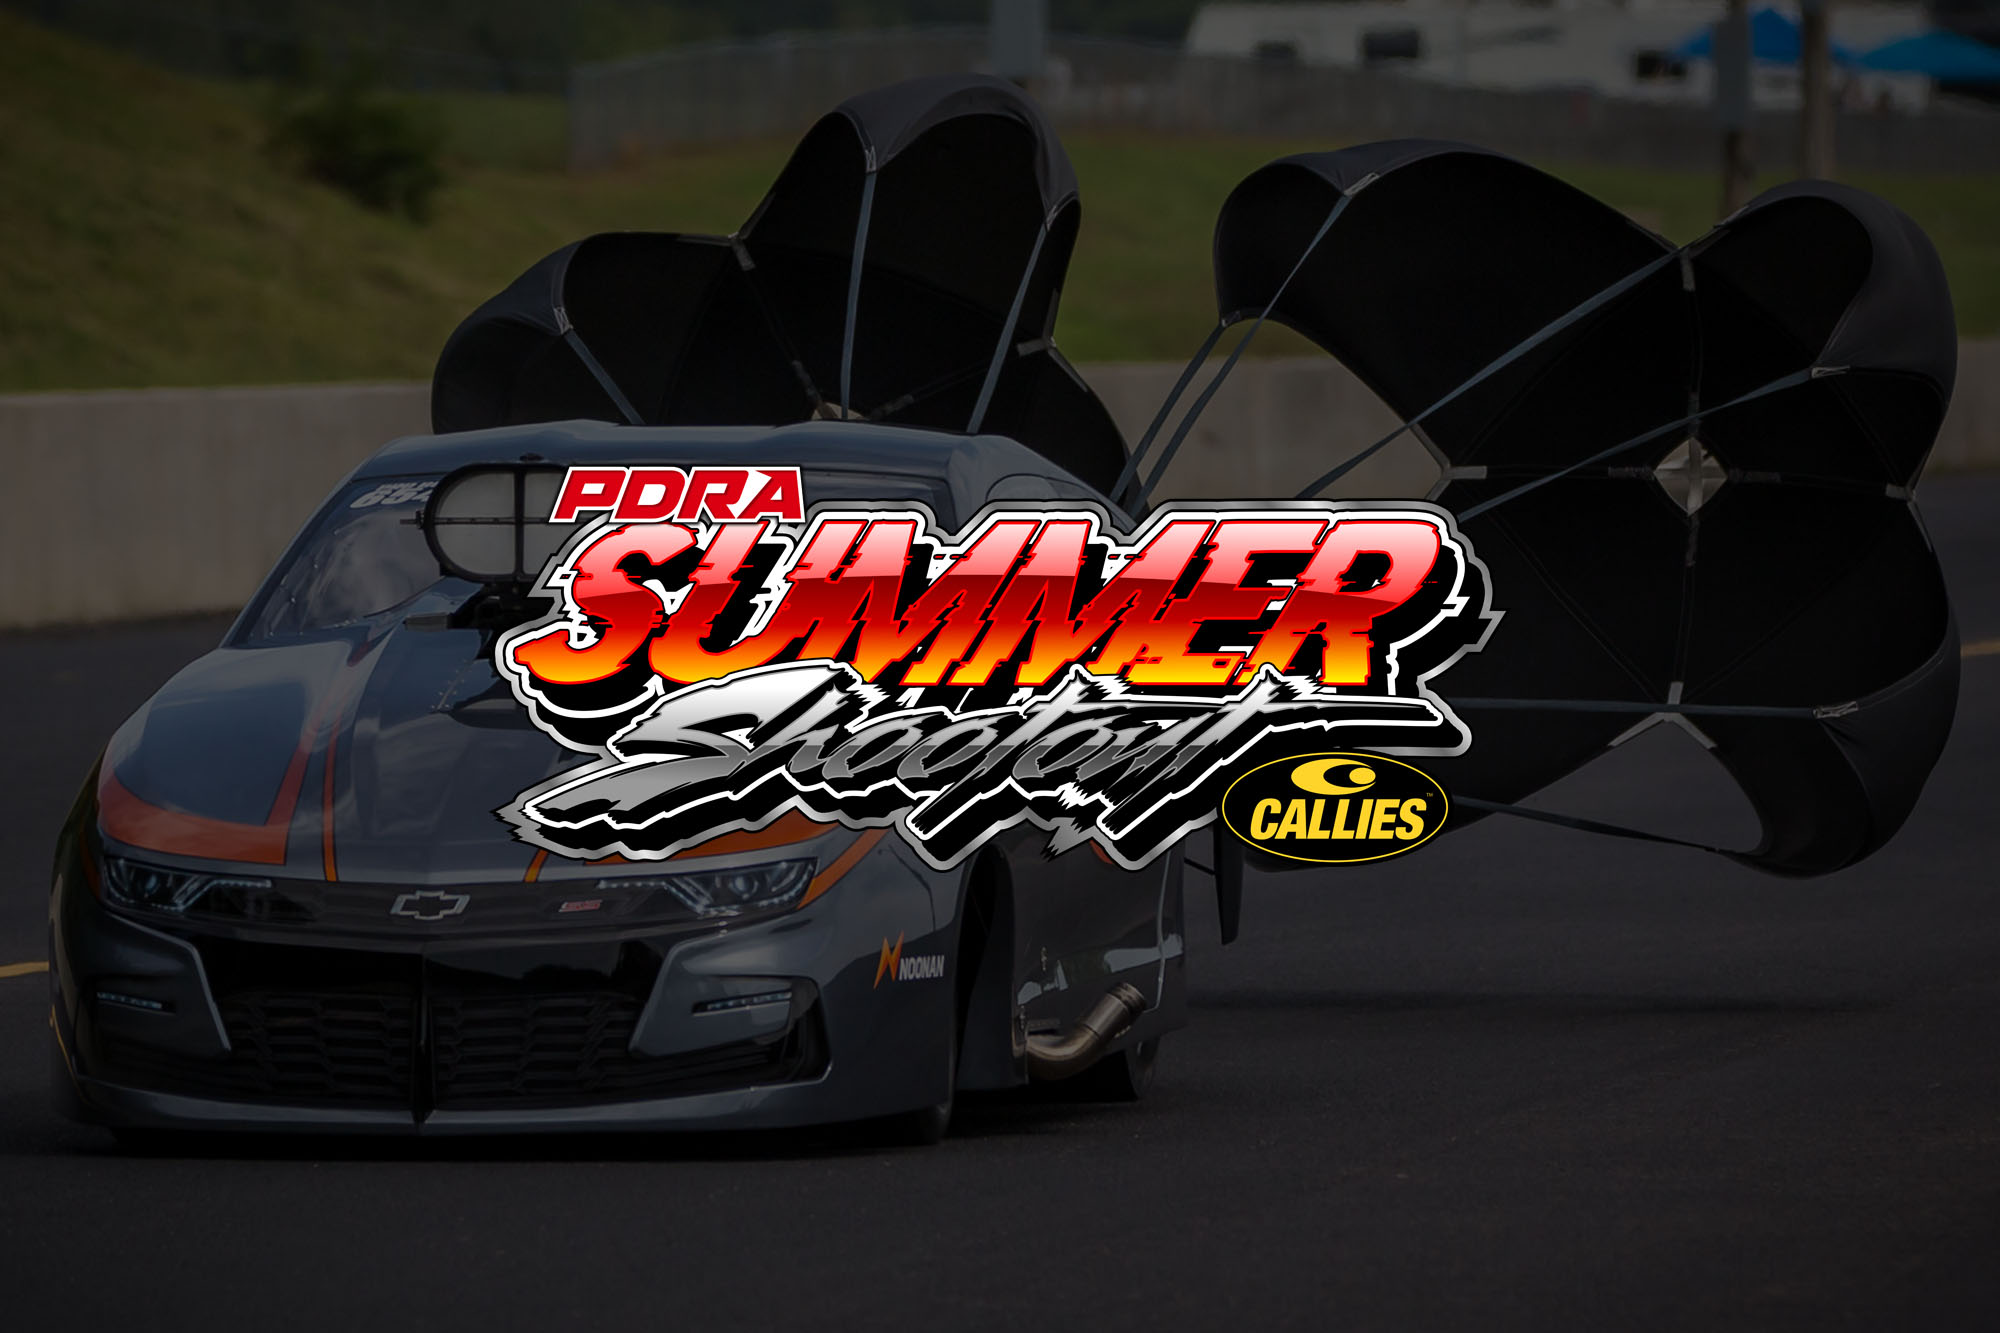 Virginia Drivers Dominate on Home Turf at PDRA Summer Shootout